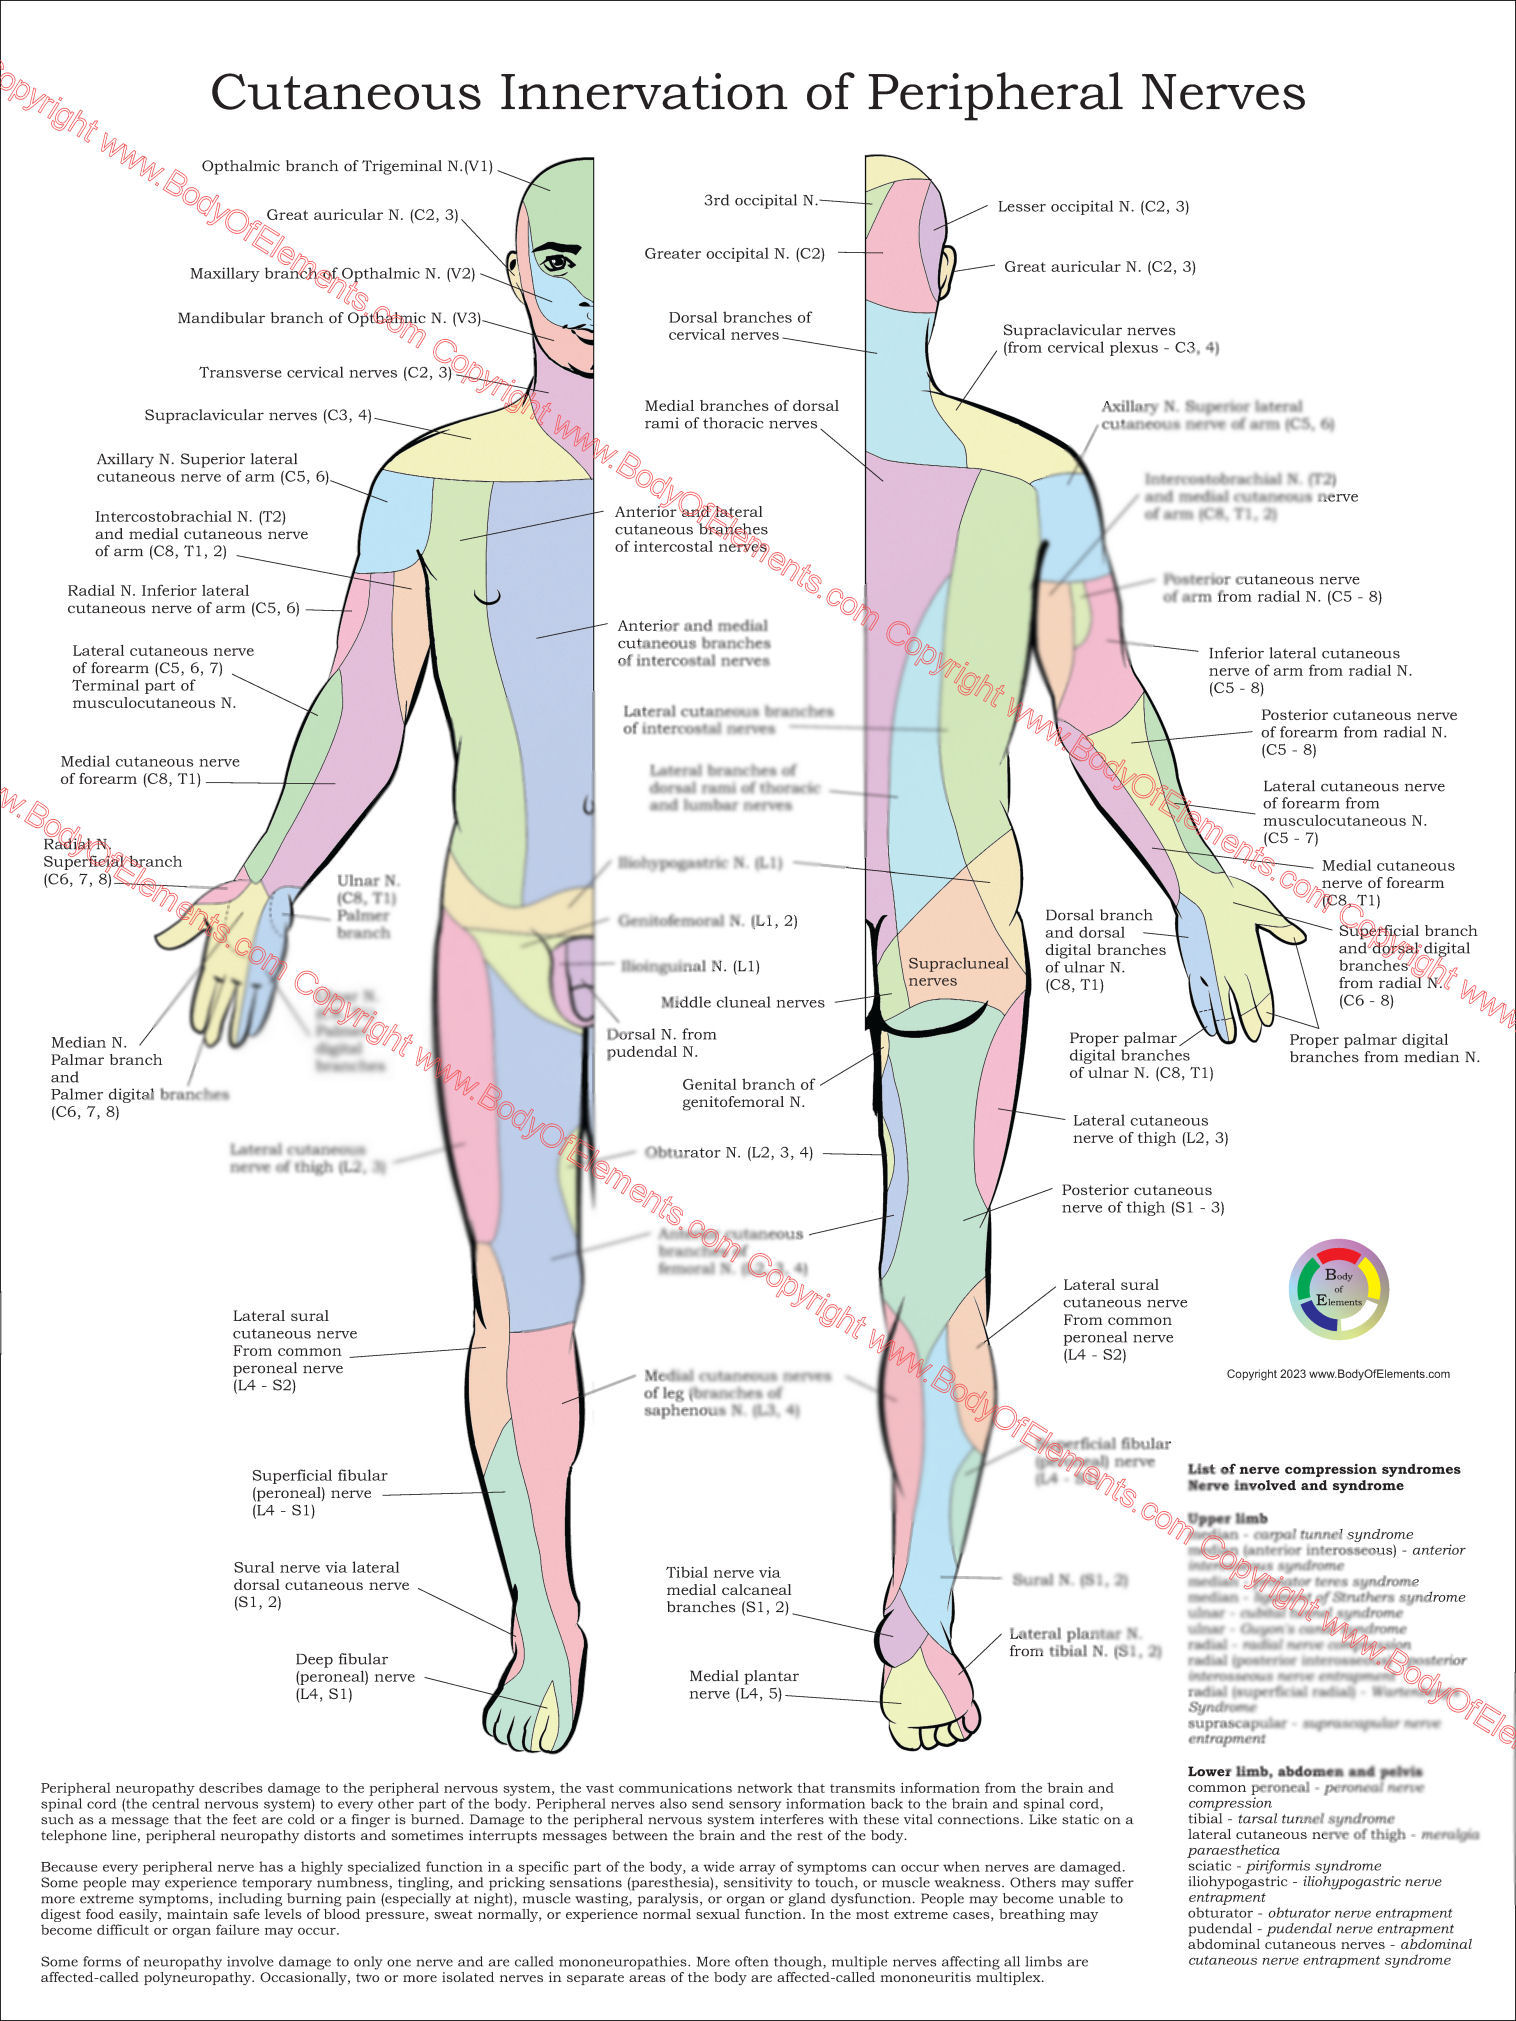 Cutaneous Innervation of Peripheral Nerves Poster